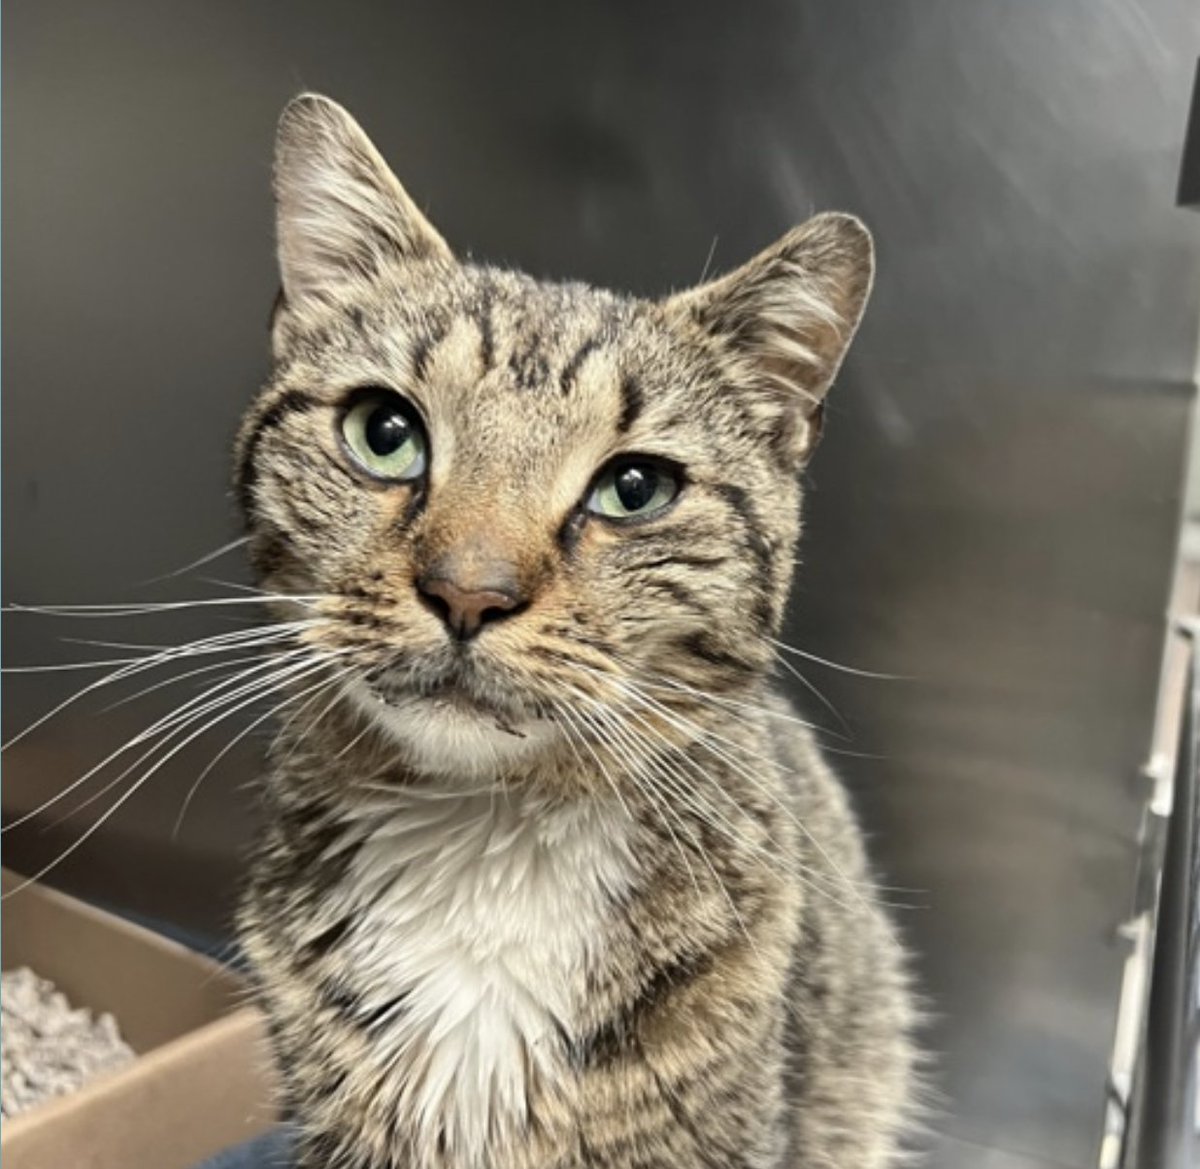 🆘🆘 For Marcus 8 yo in Manhattan ACC 🔥
Only 250 usd is too low to save him 😿🙏

INJURED 😿🤬🔥🔥
🚨MEDICAL PRIORITY🚨
NEEDS OUT ASAP 🔥

Marcus was brought in by field as an injured stray. Bleeding cat found in school yard.

Please RT or pledge if you can to save his life